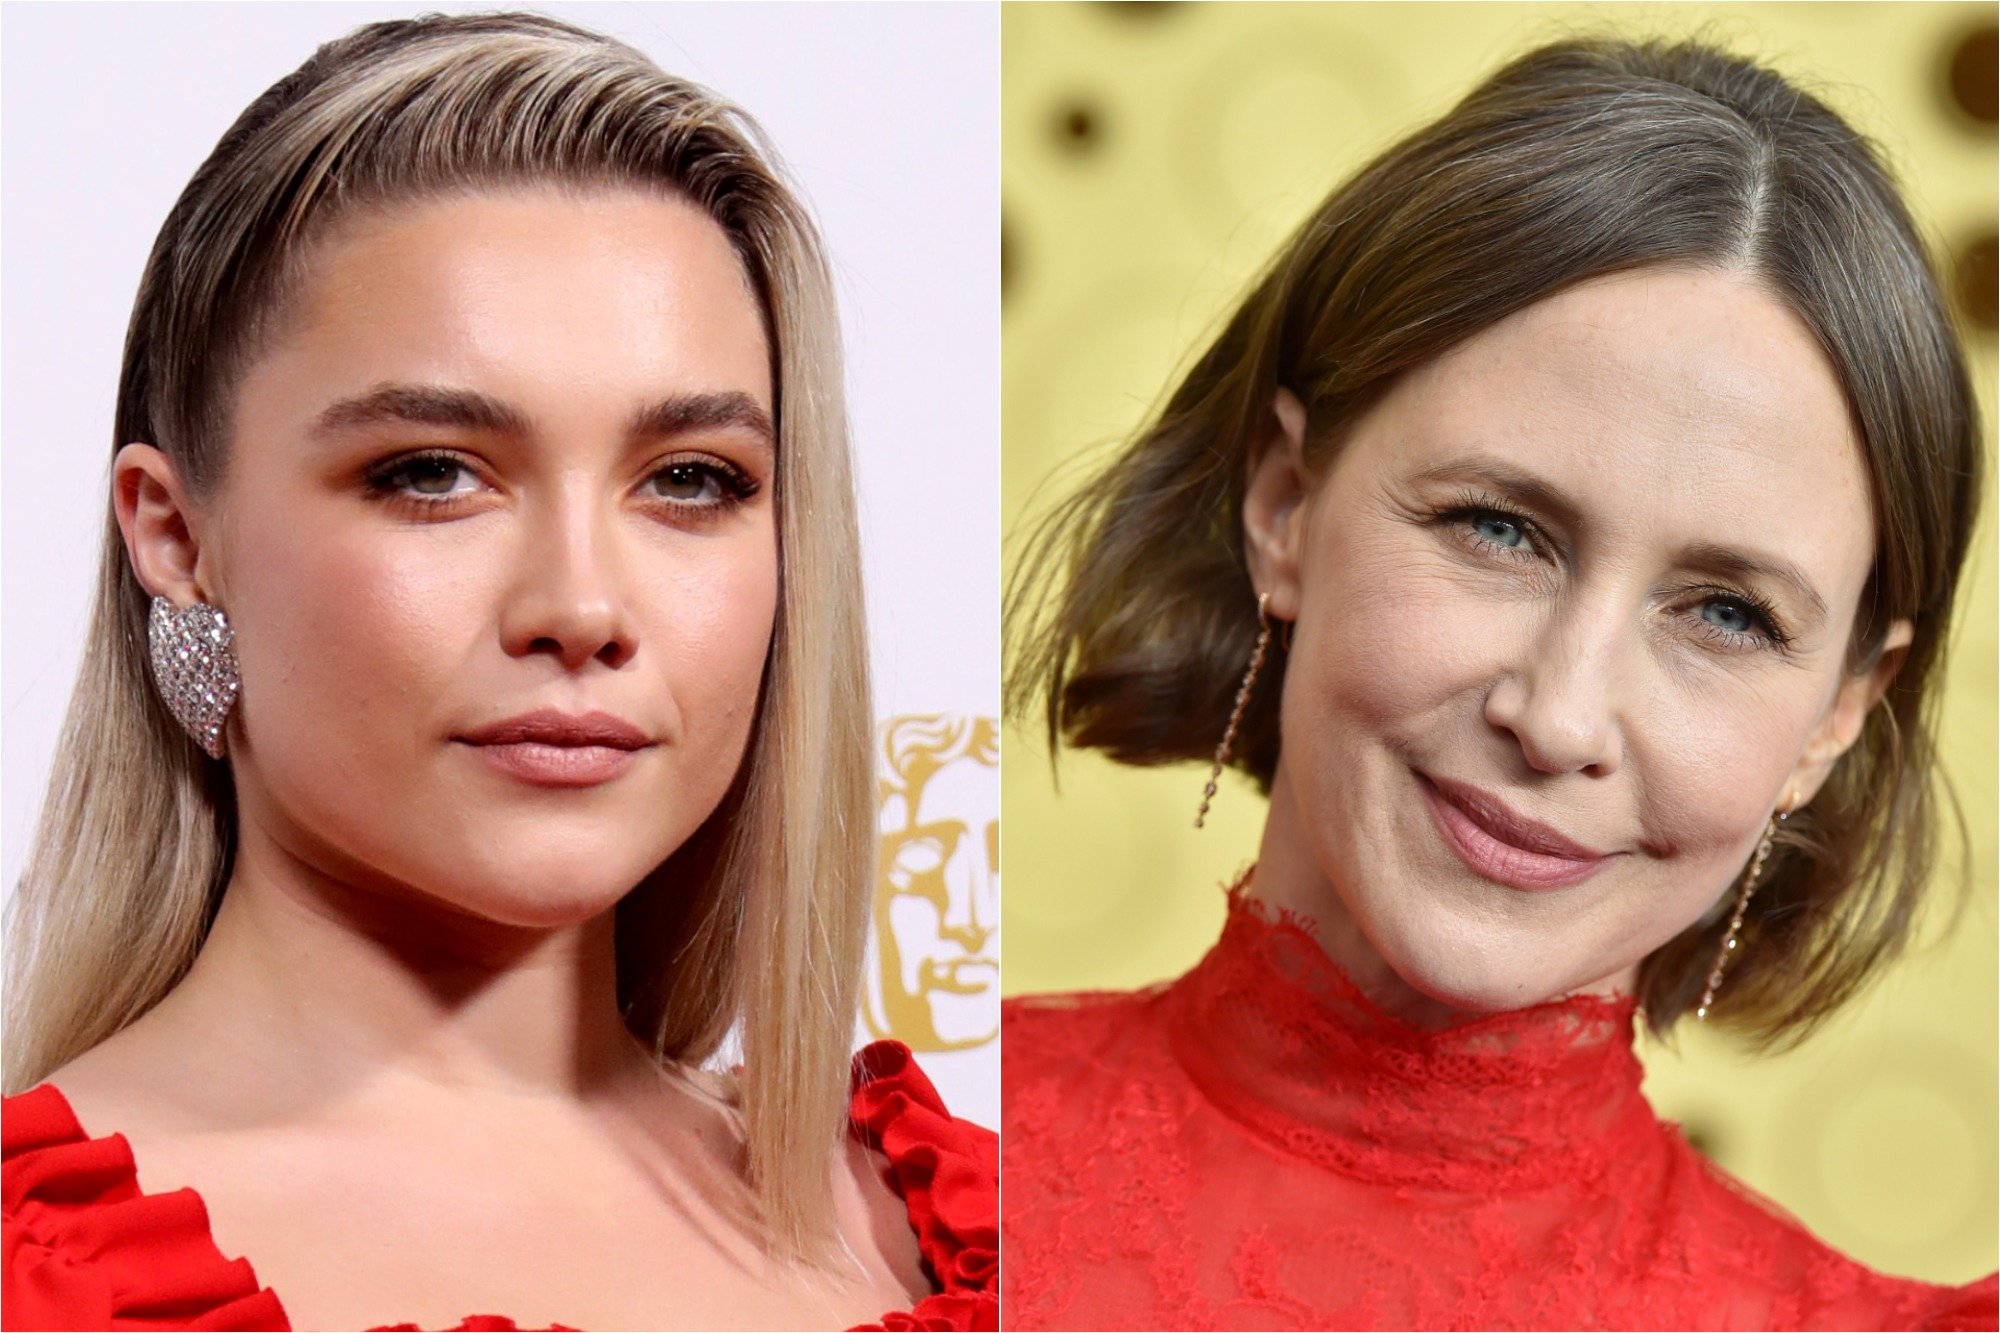 Florence Pugh at the EE British Academy Film Awards 2020 Nominees' Party on Feb. 01, 2020 / Vera Farmiga at the 71st Emmy Awards on Sept. 22, 2019